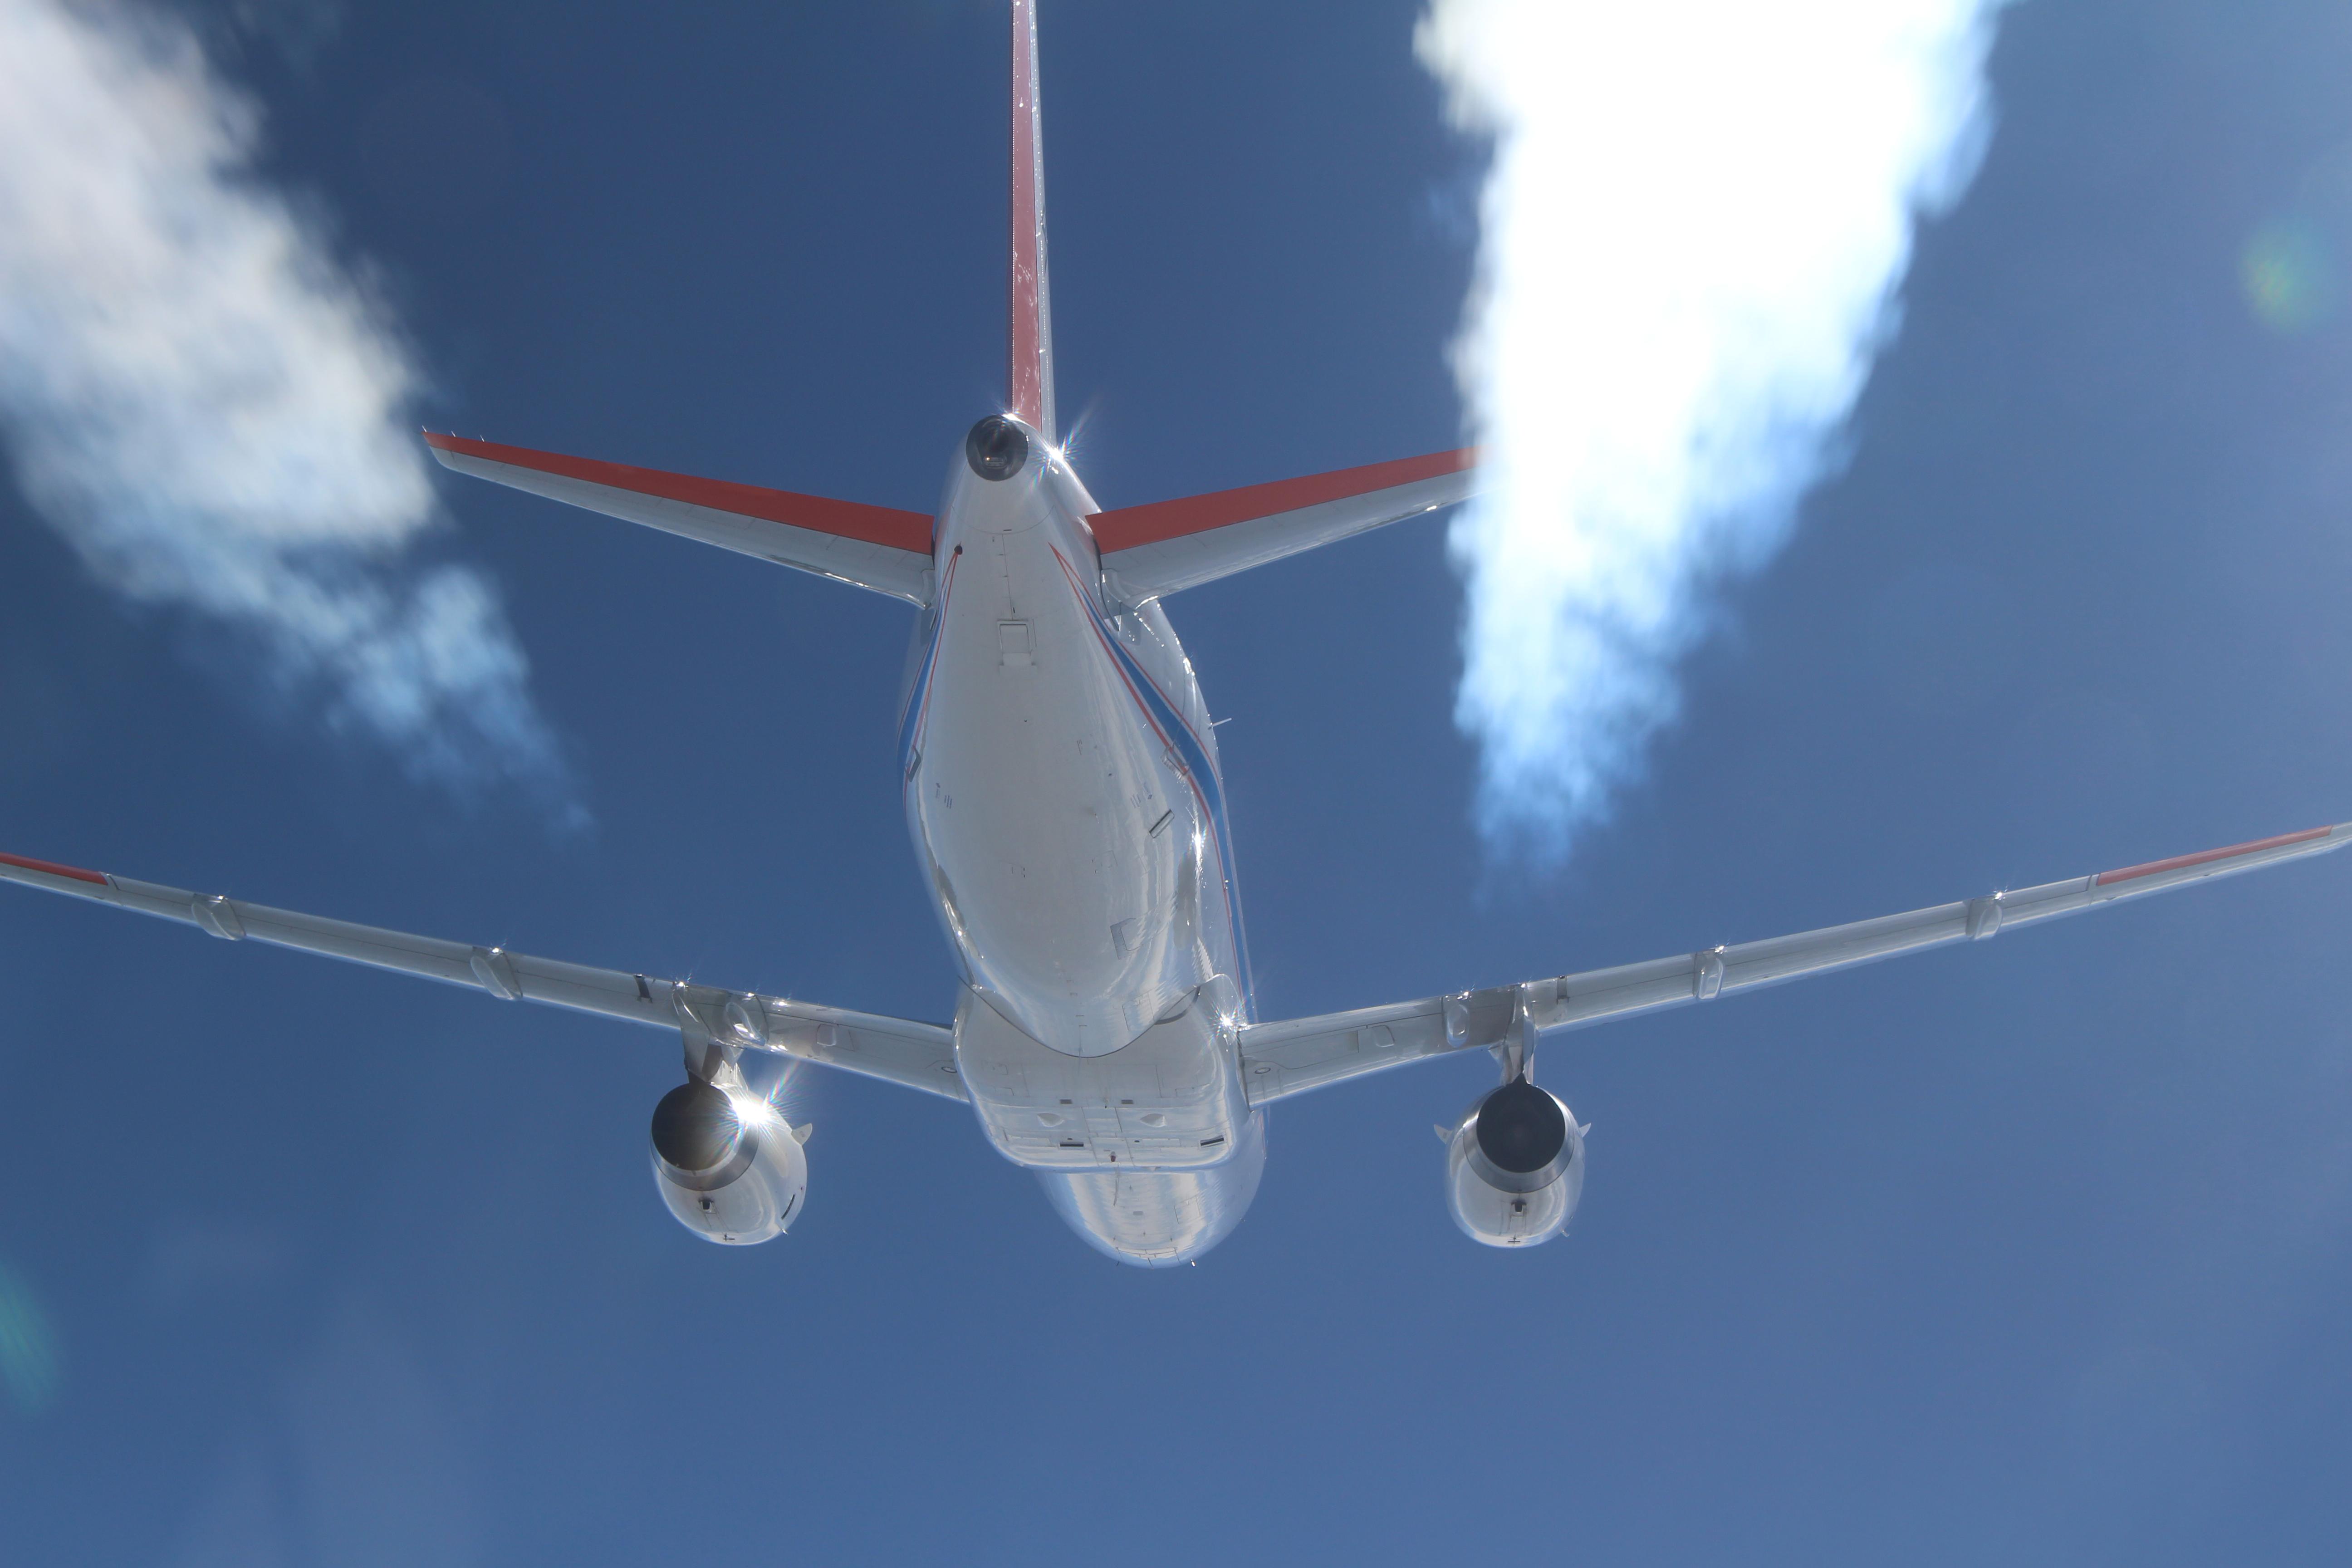 Contrails from Airbus A320